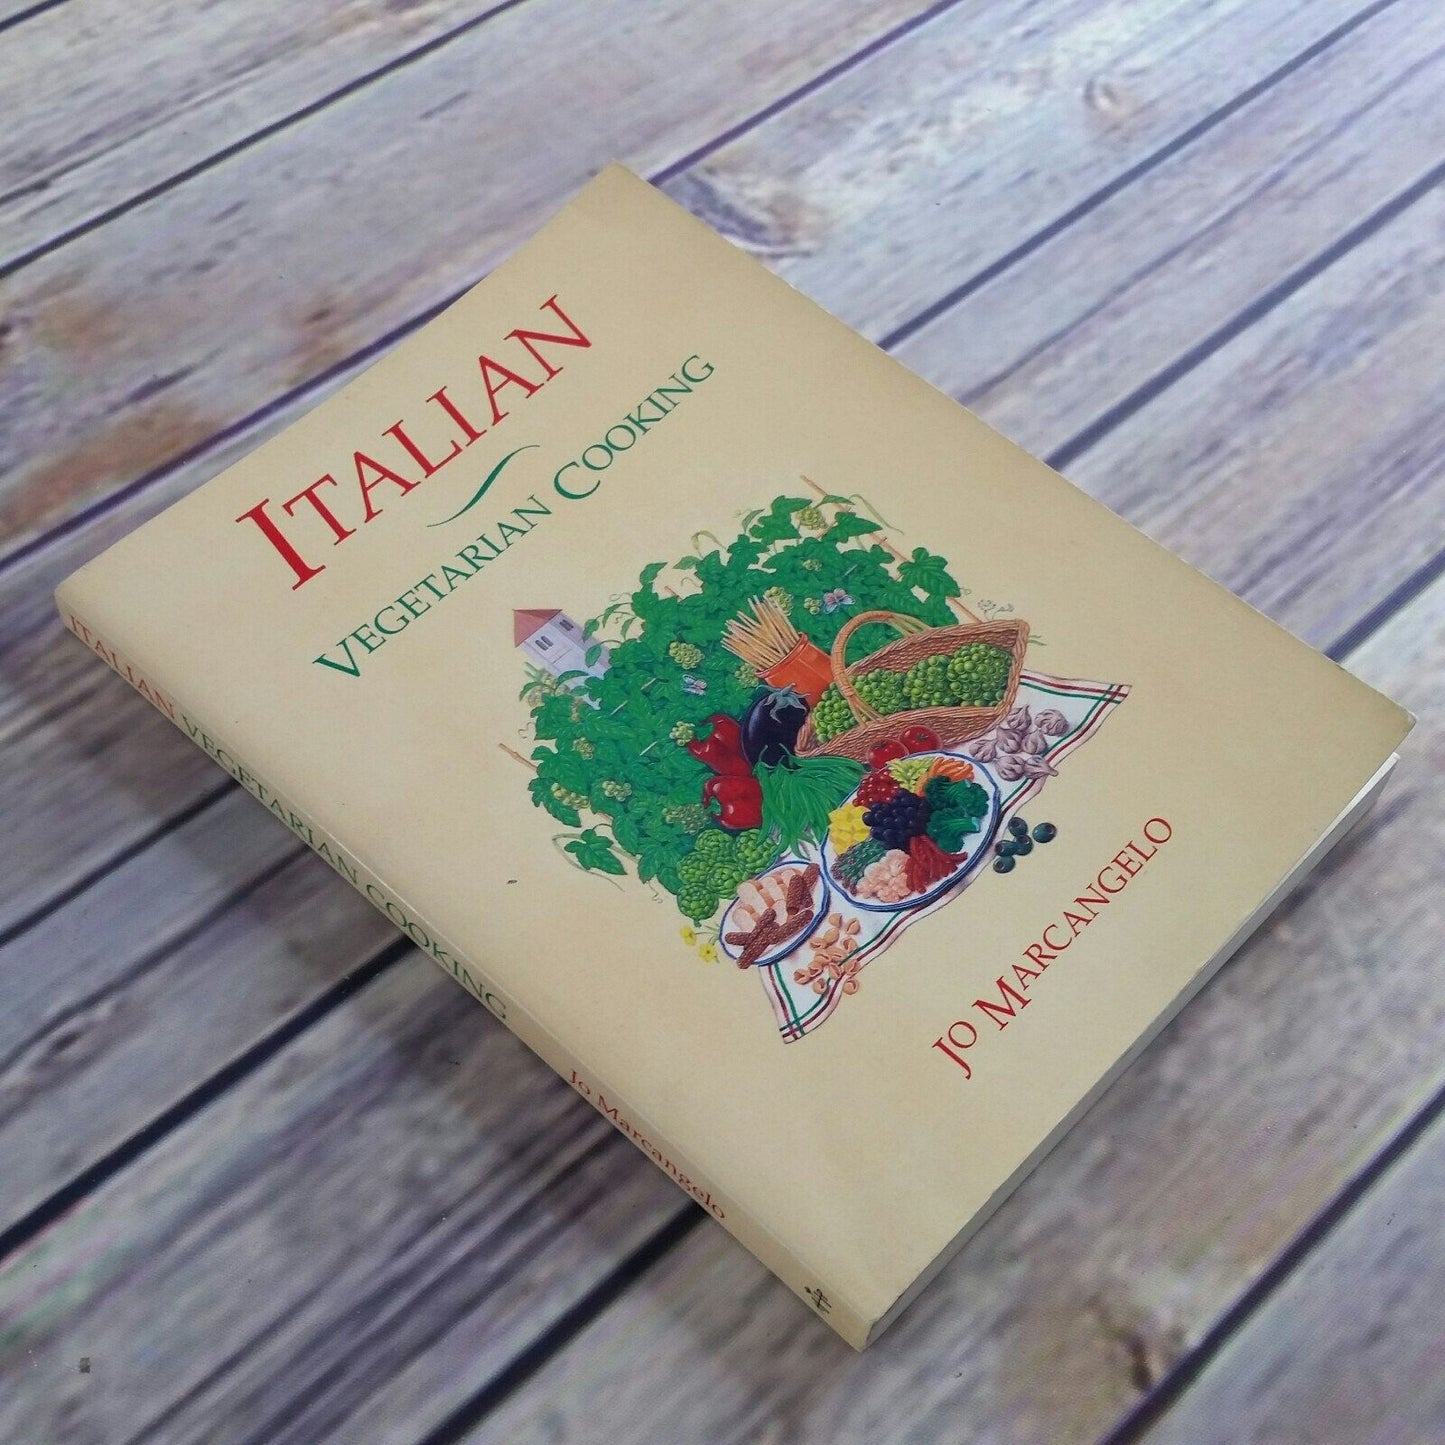 Vintage Italian Cookbook Jo Marcangelo 1989 Paperback Cook Book Traditional Italian Recipes Natural Whole Food Ingredients